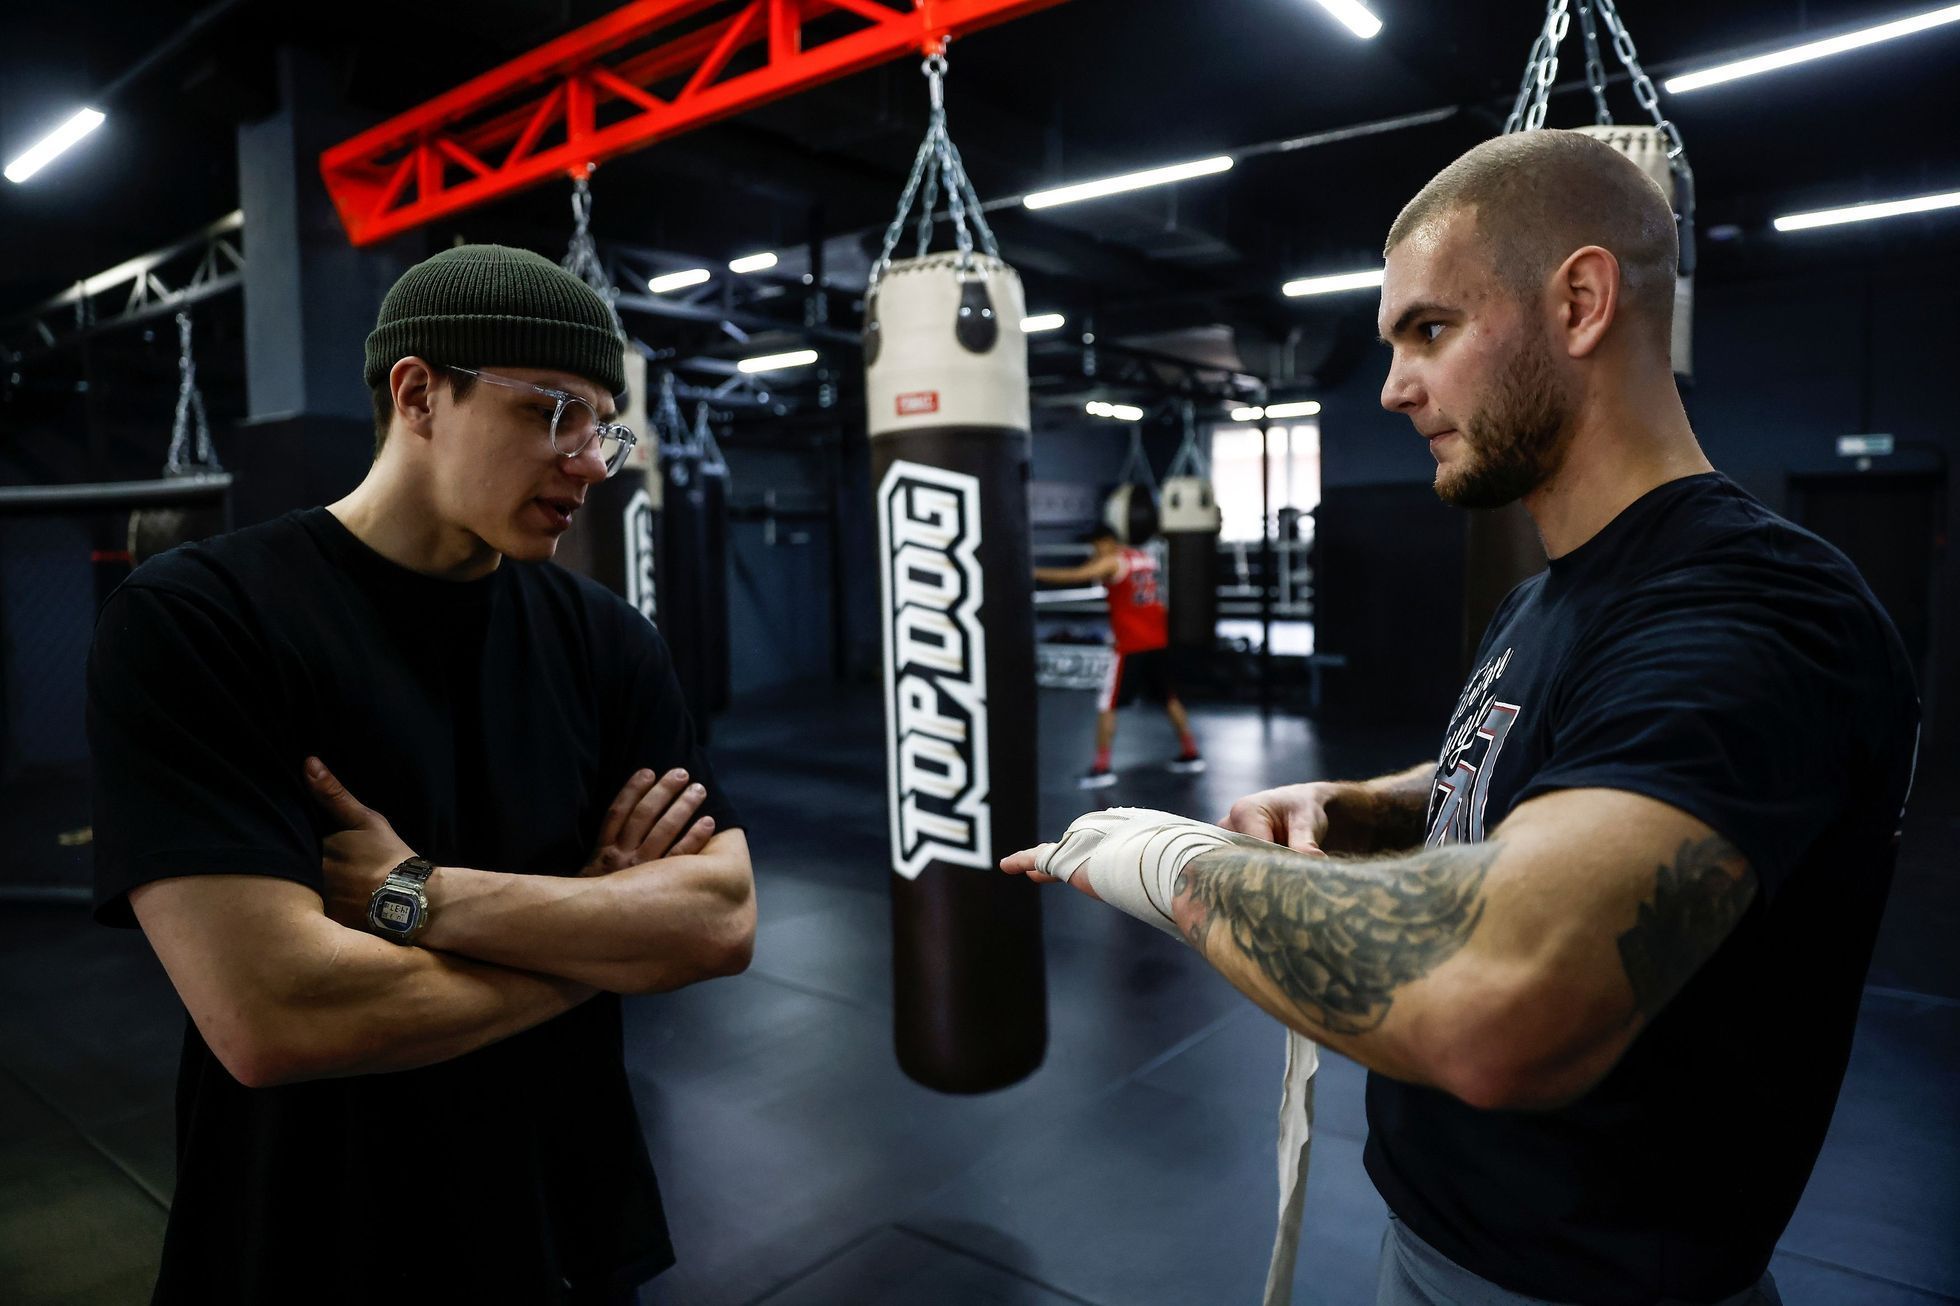 Founder of the "Top Dog" bare-knuckle boxing tournament Danil Andreev speaks during an interview in Moscow